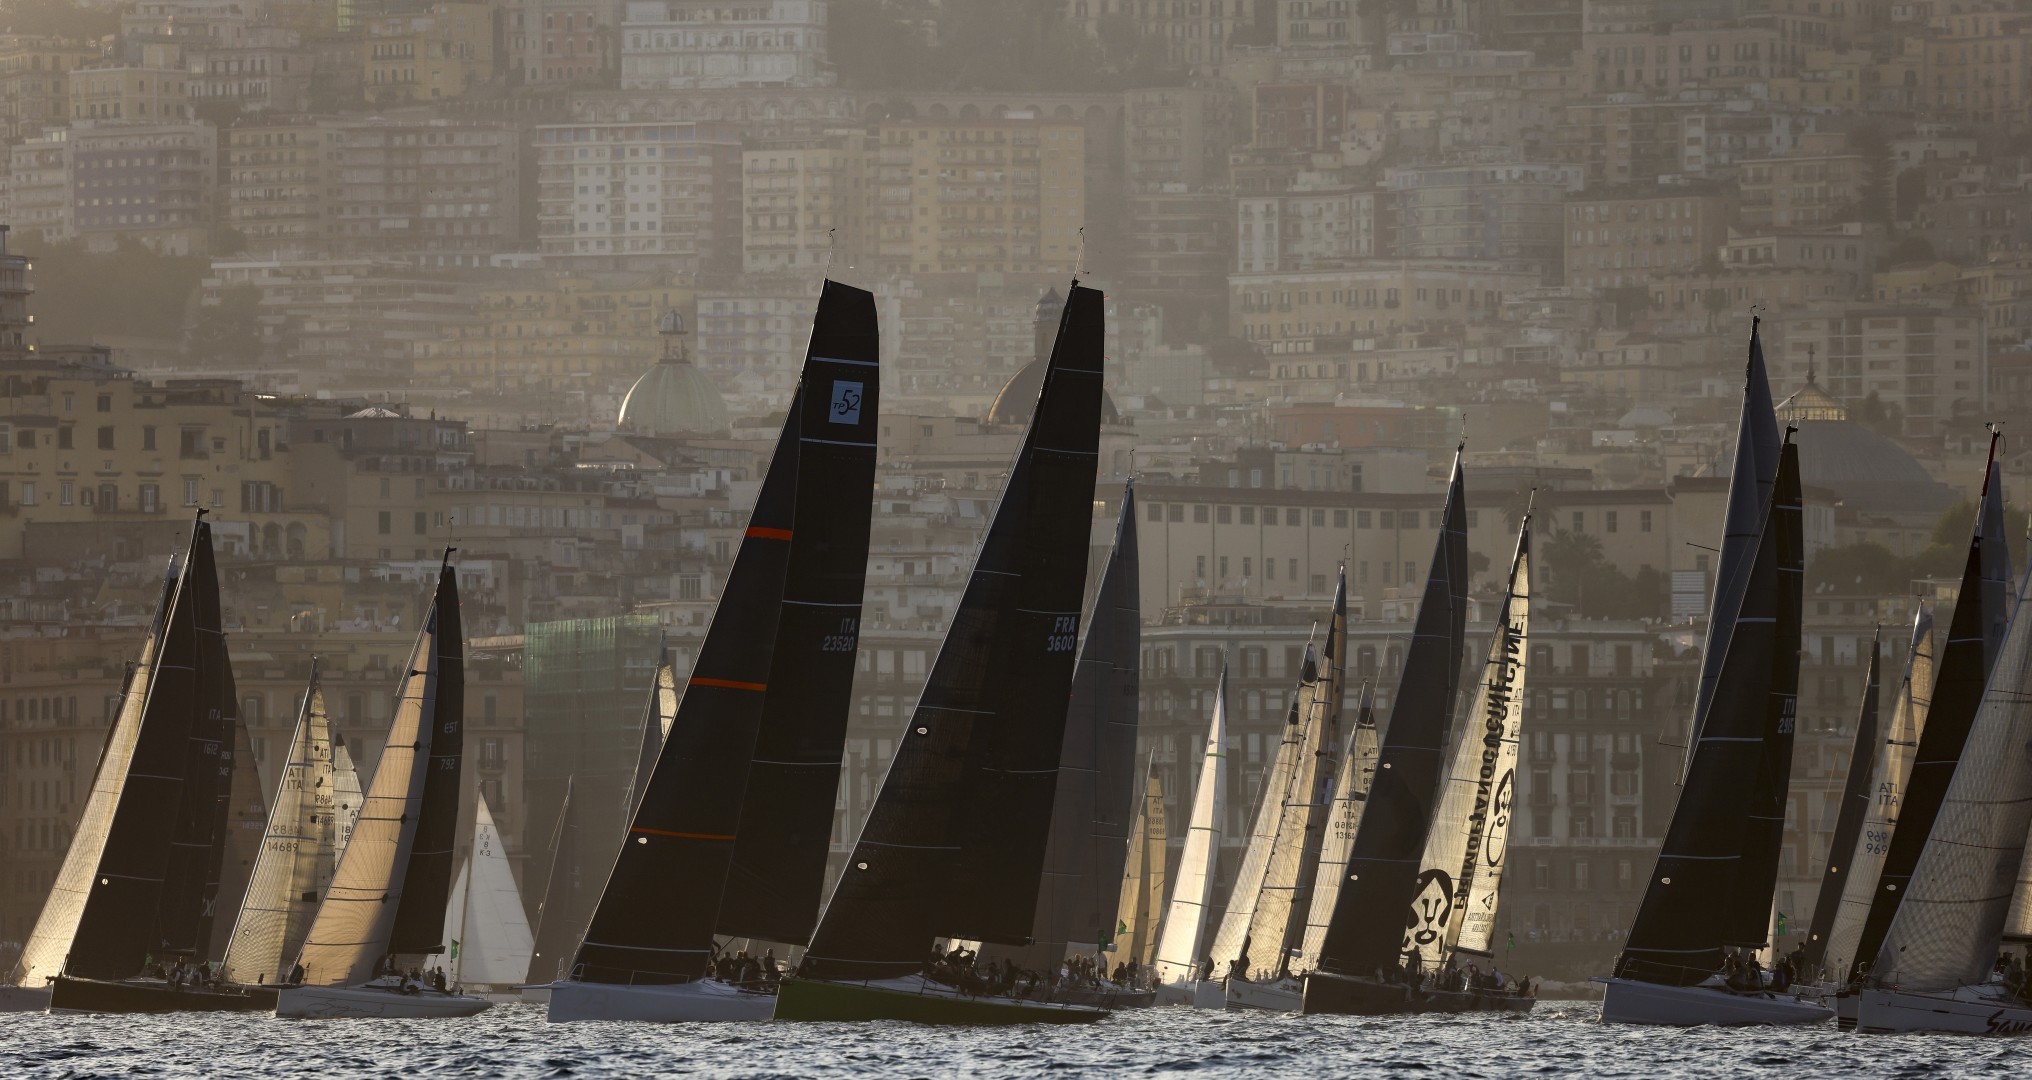 The 2023 Tre Golfi Sailing week promises to be a vintage edition